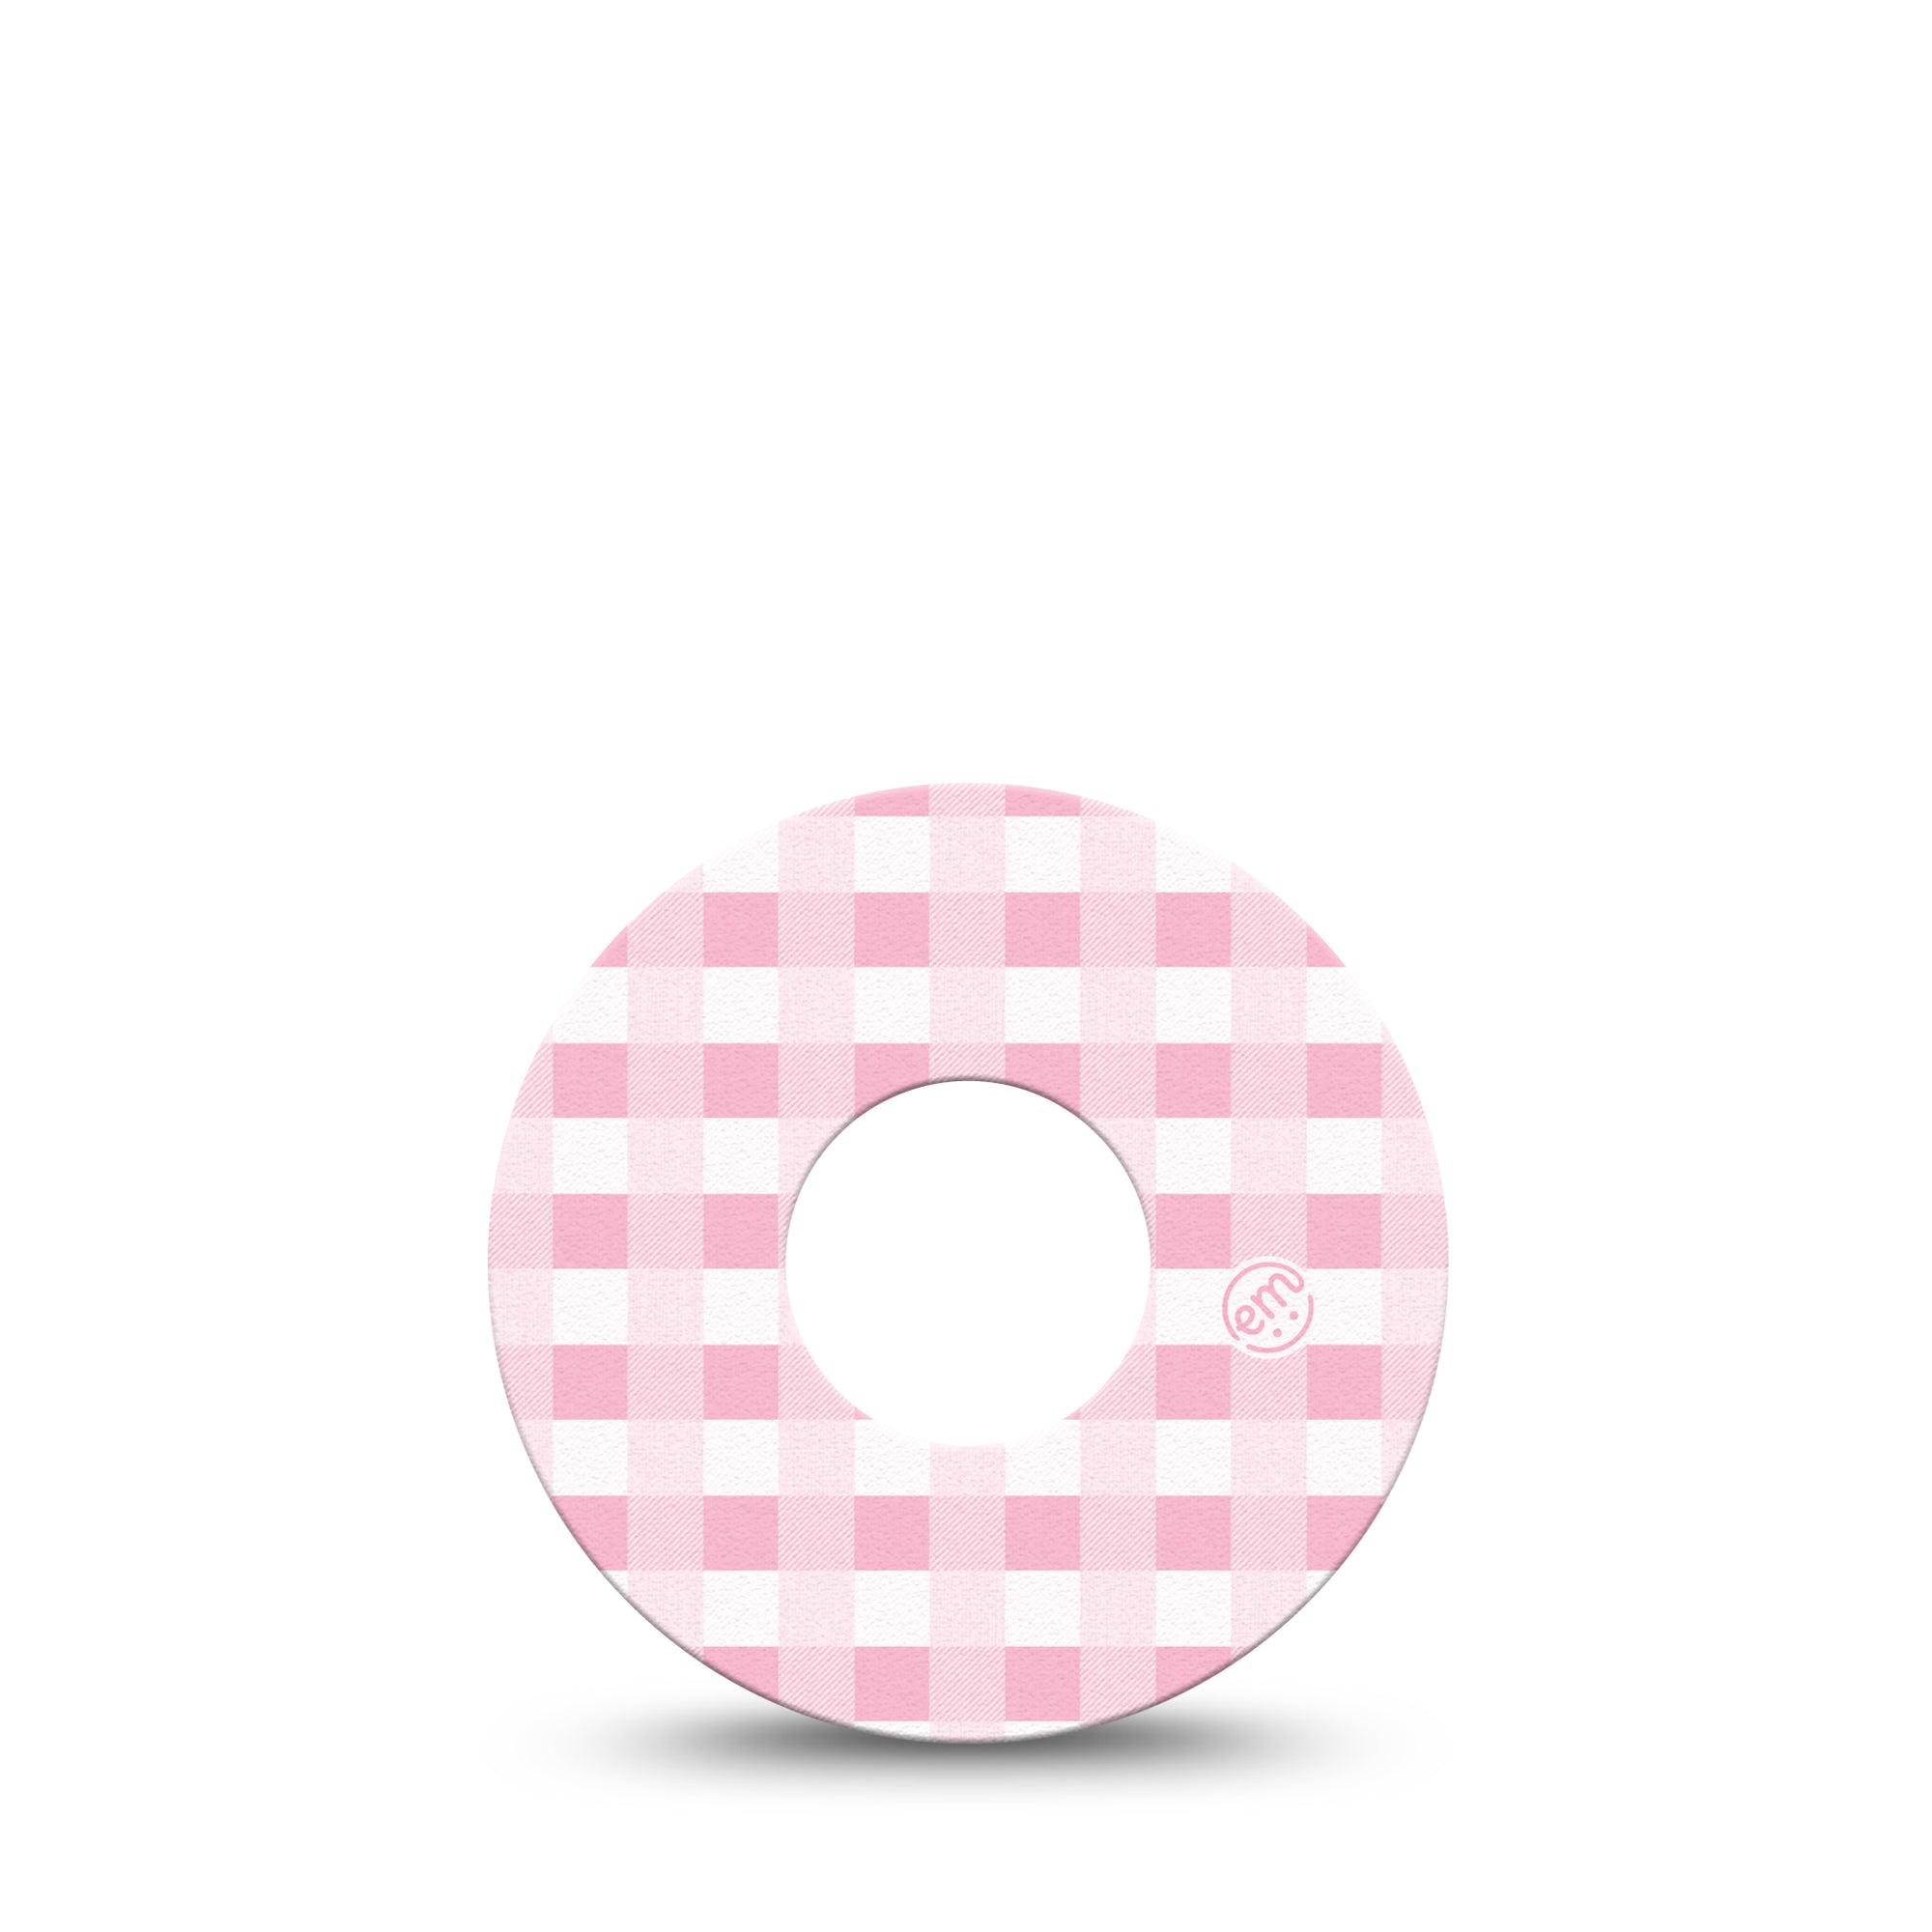 ExpressionMed Pink Gingham Infusion Set Tape, 5-Pack, Colors And Stripes Inspired, Overlay Patch Design